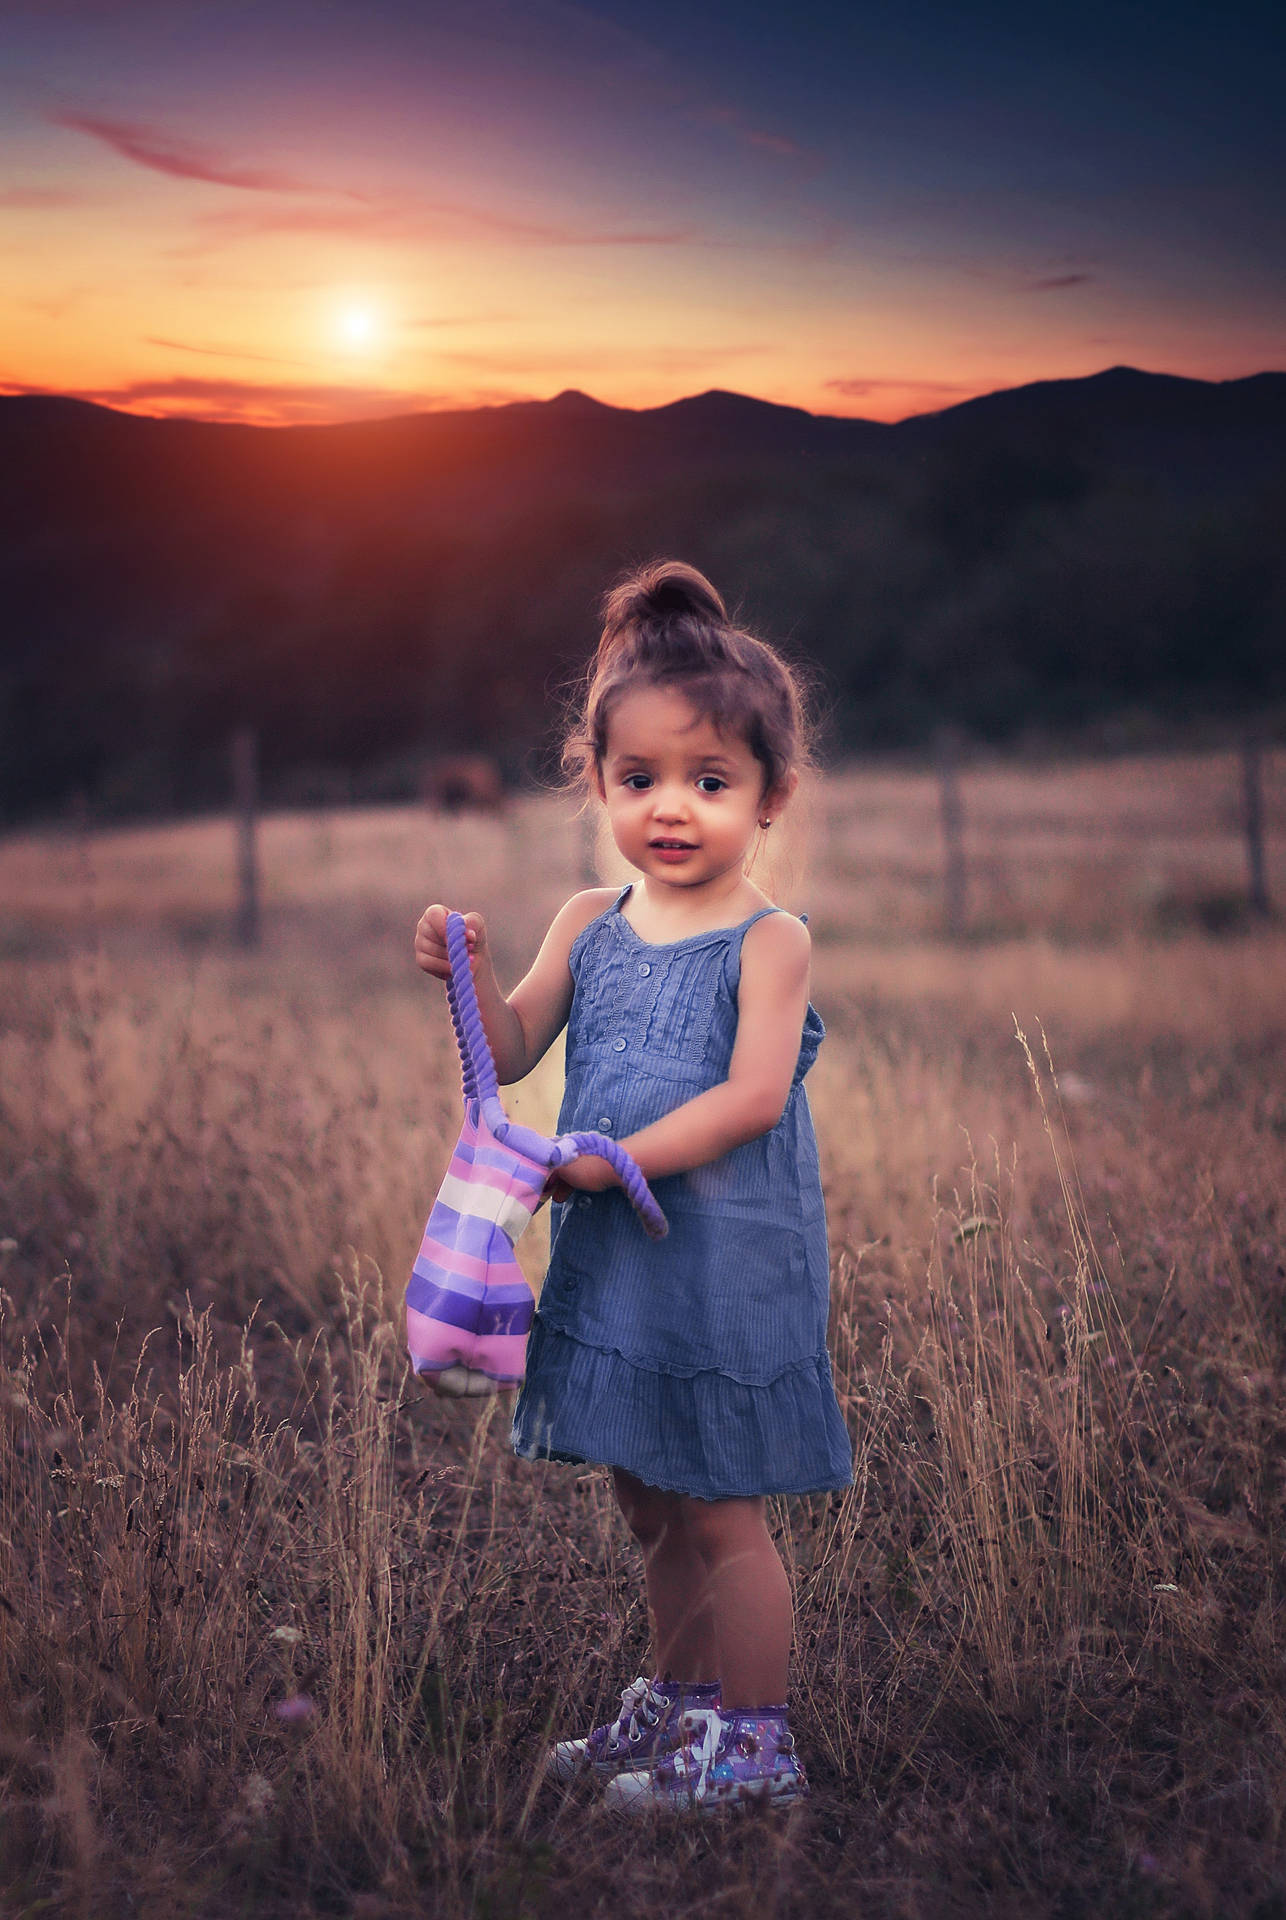 Cute Girl With Bag In Grass Field Background